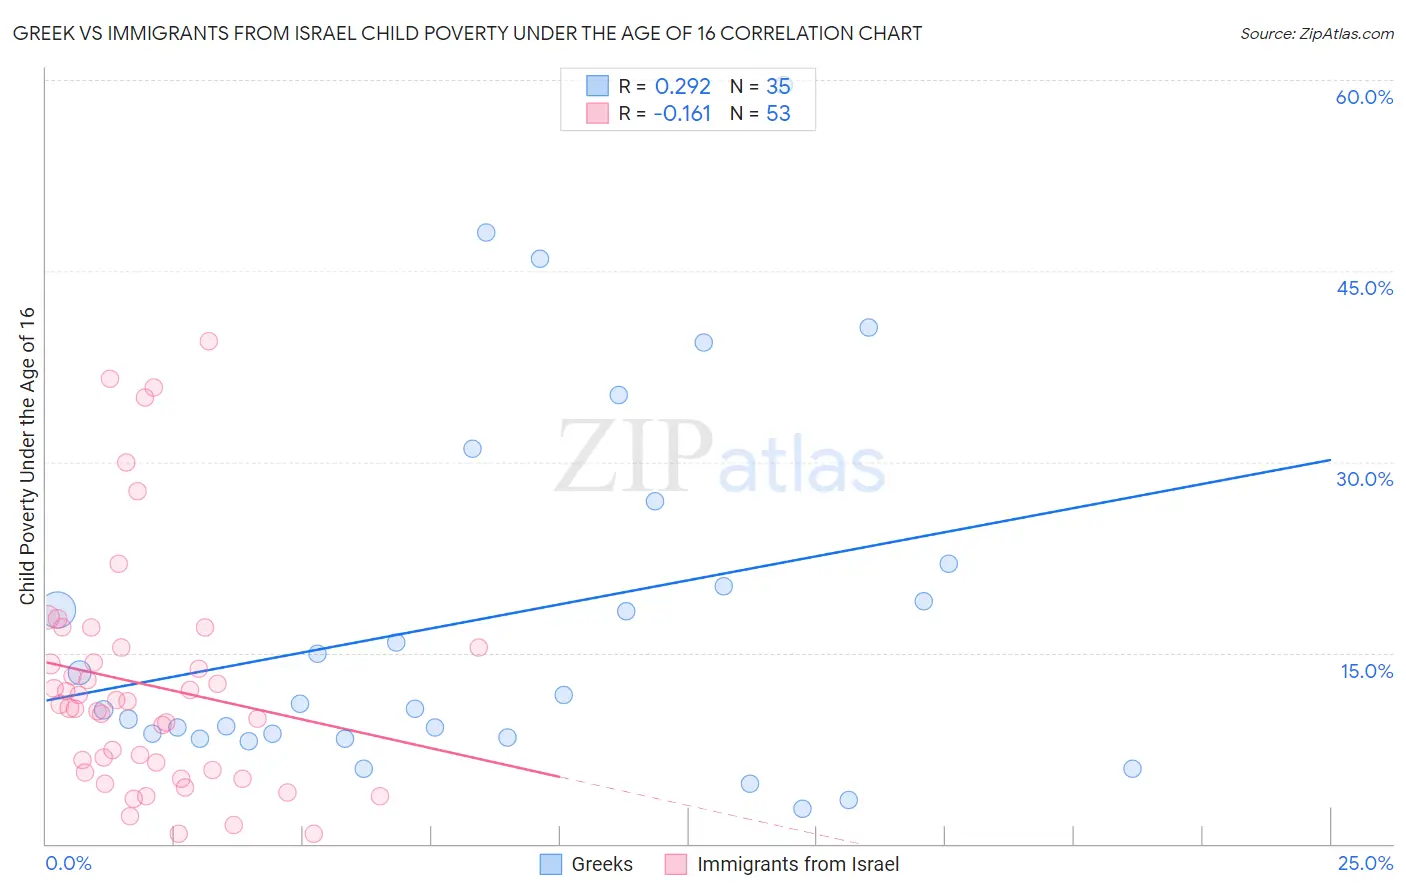 Greek vs Immigrants from Israel Child Poverty Under the Age of 16